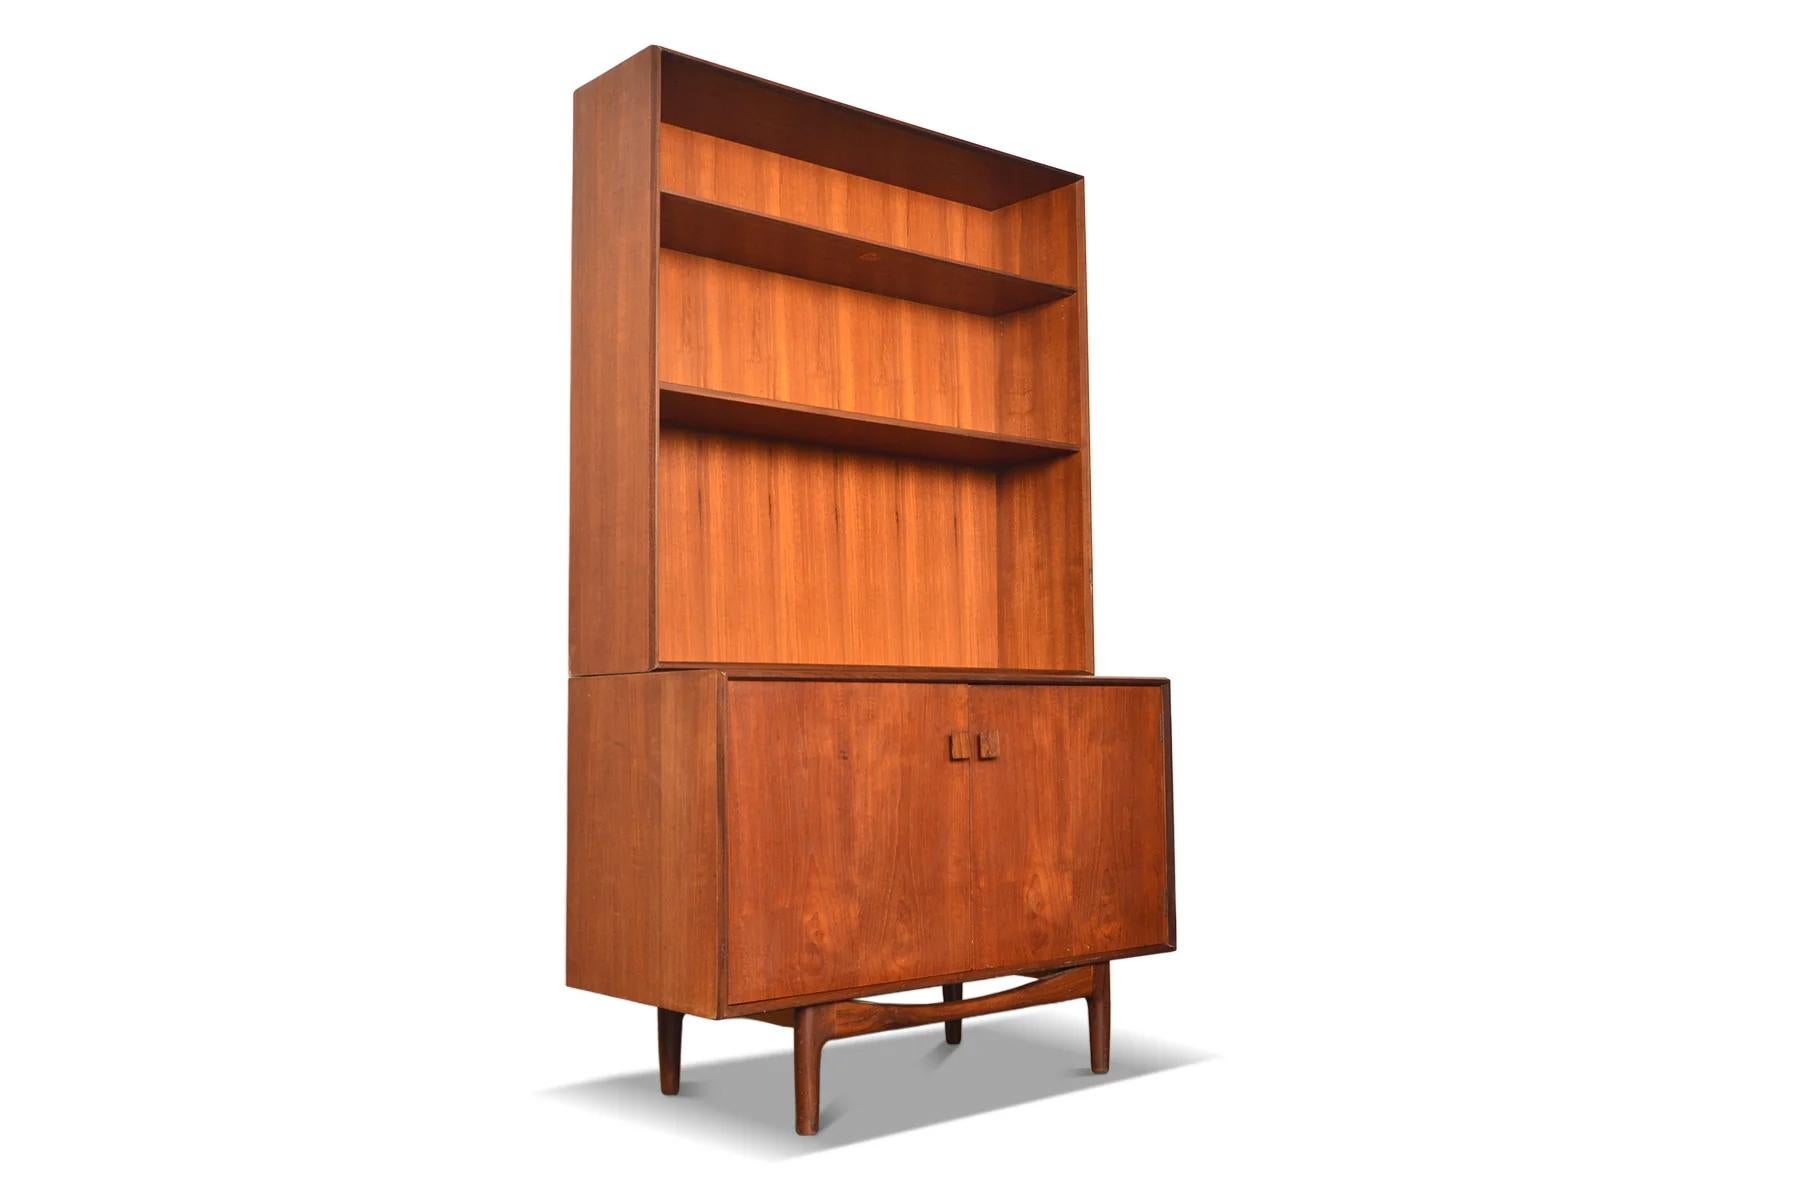 Origin: England
Designer: Ib Kofod Larsen
Manufacturer: G Plan
Era: 1960s
Materials: Teak, Afromosia
Measurements: 40″ wide x 18″ deep x 68″ tall

Condition: In excellent original condition with typical wear for its vintage. Price includes